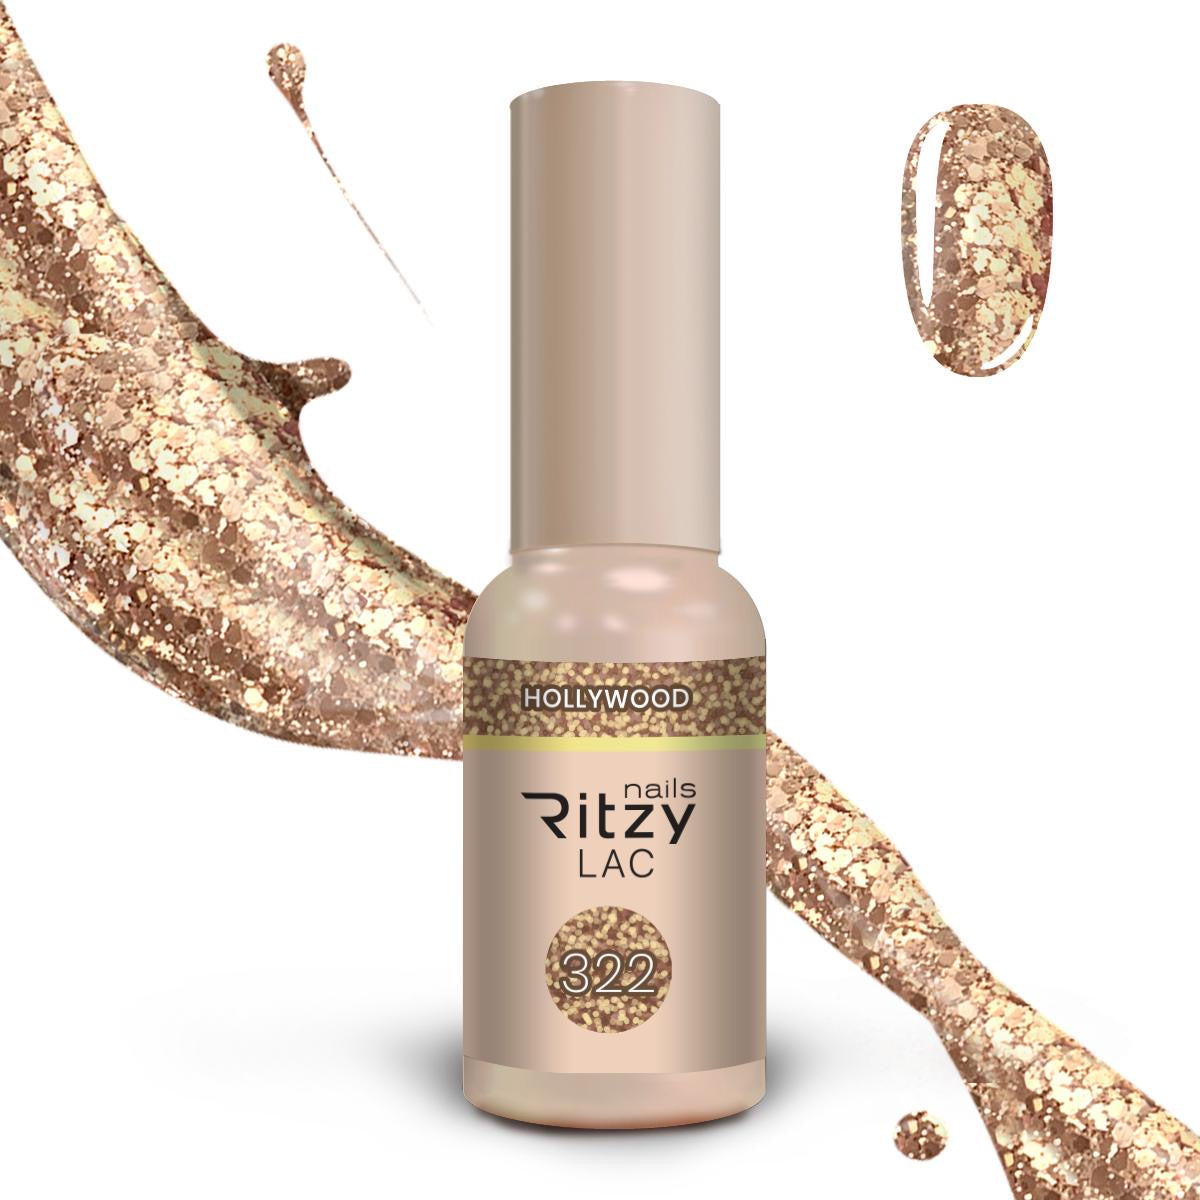 Ritzy Nails “Let it Glow ”collection of 10x 9ml colors.